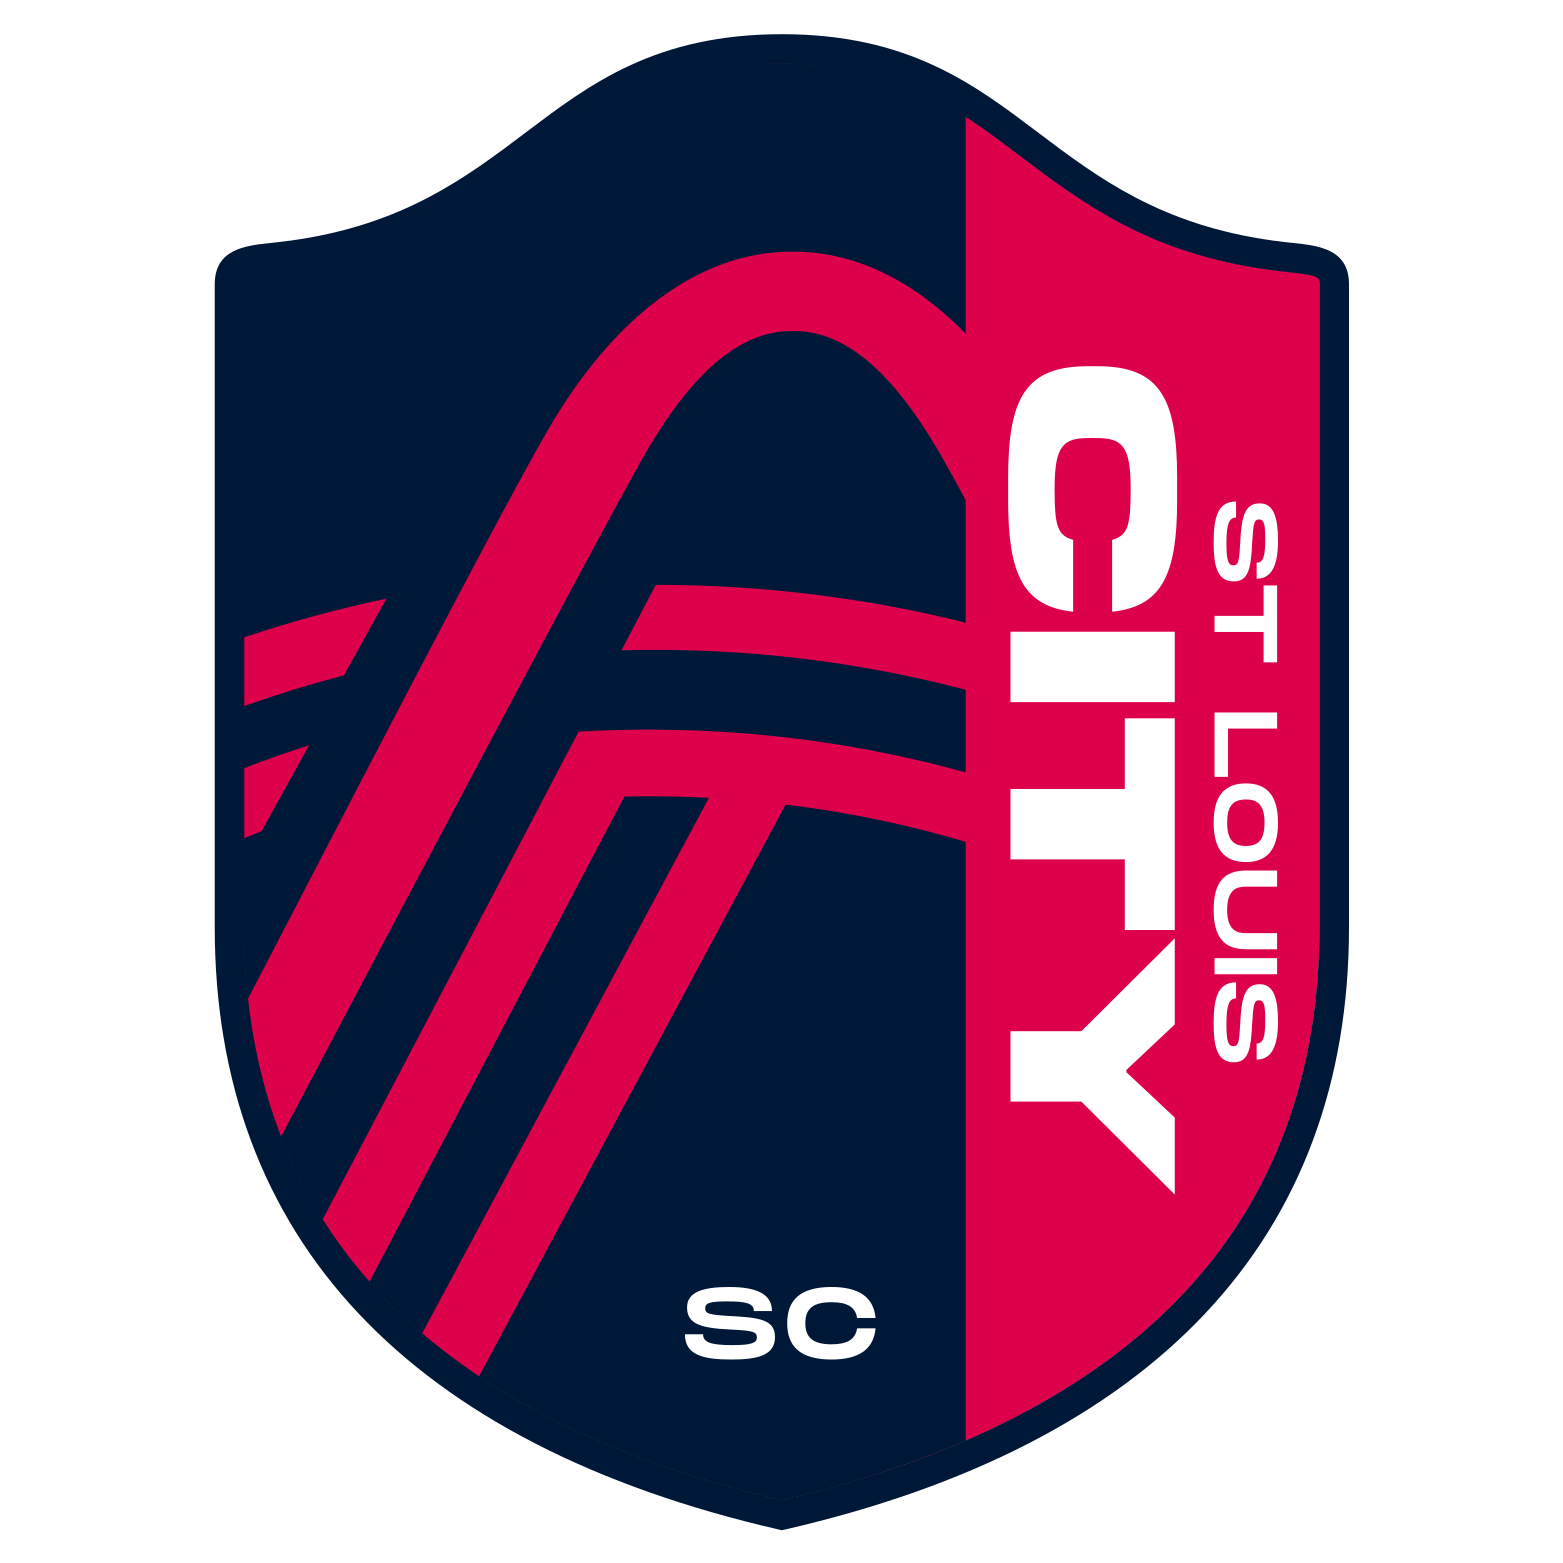 St. Louis City vs Chicago Fire Prediction: Low scoring draw is most likely 